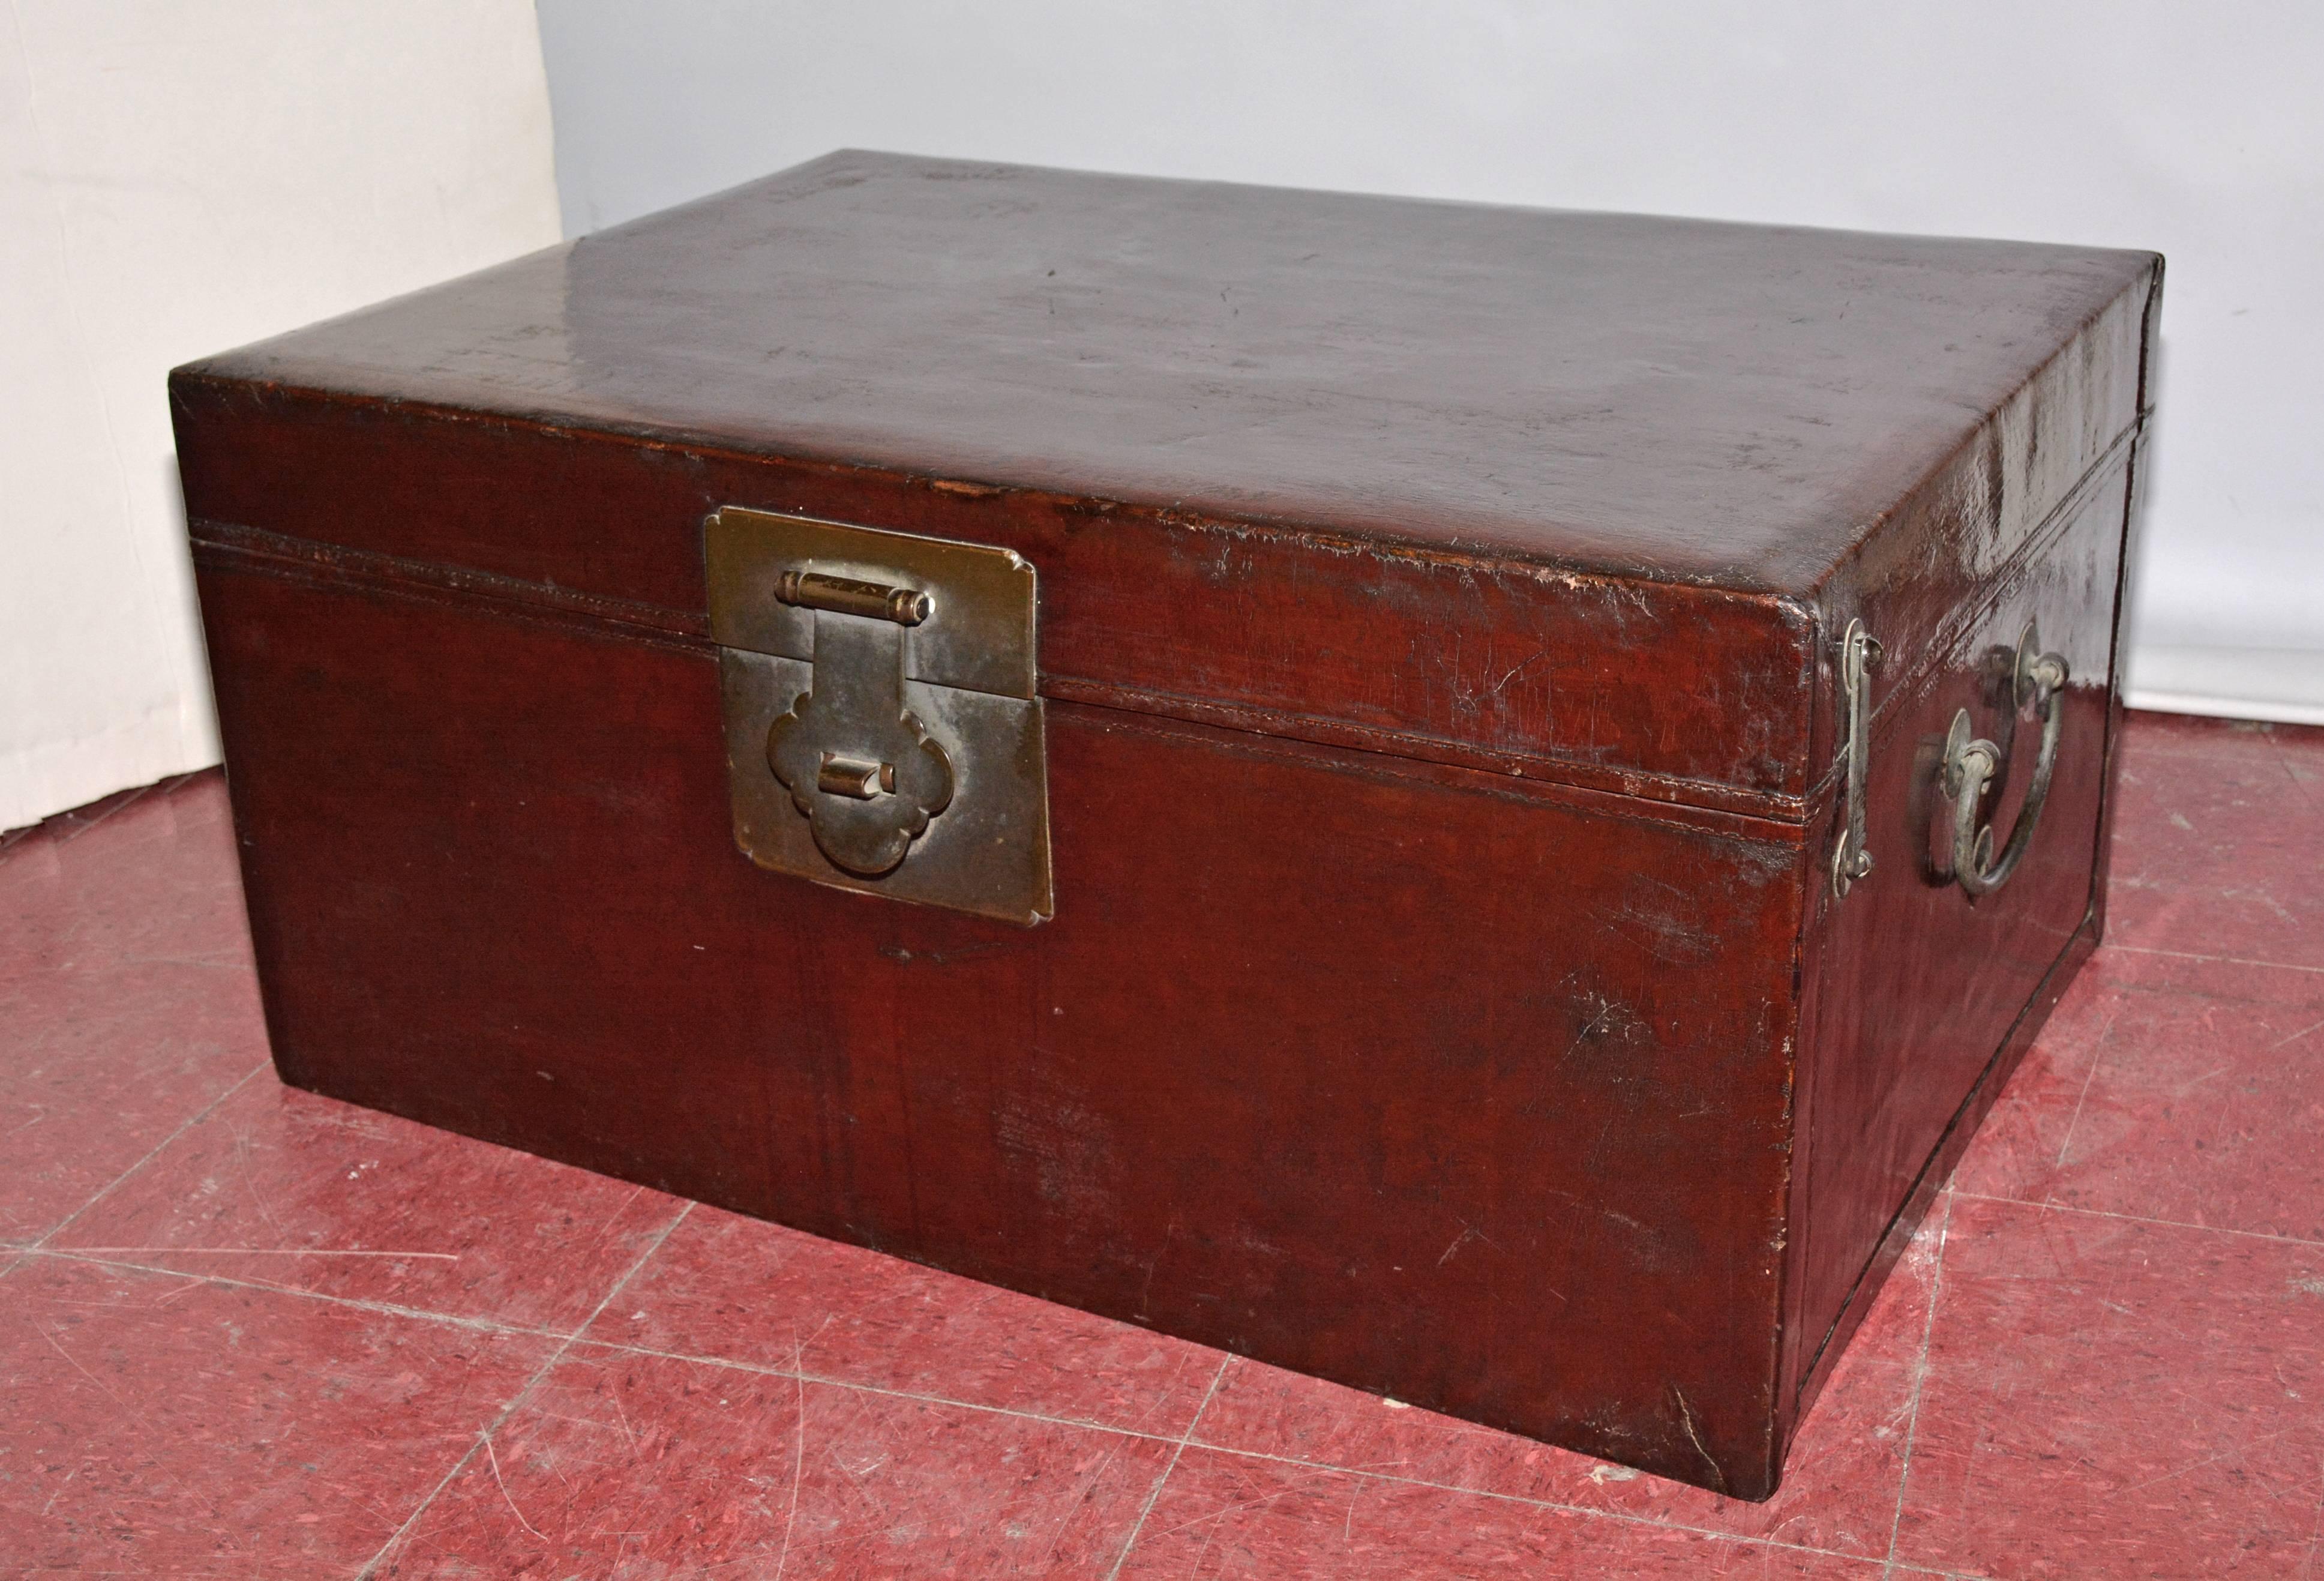 The chest has dark reddish brown lacquered wood on the outside and the inside is lined with tan imitation leather material.  There are three brass latches, one large one in front and a smaller one on each side next to iron handles.  The sides are